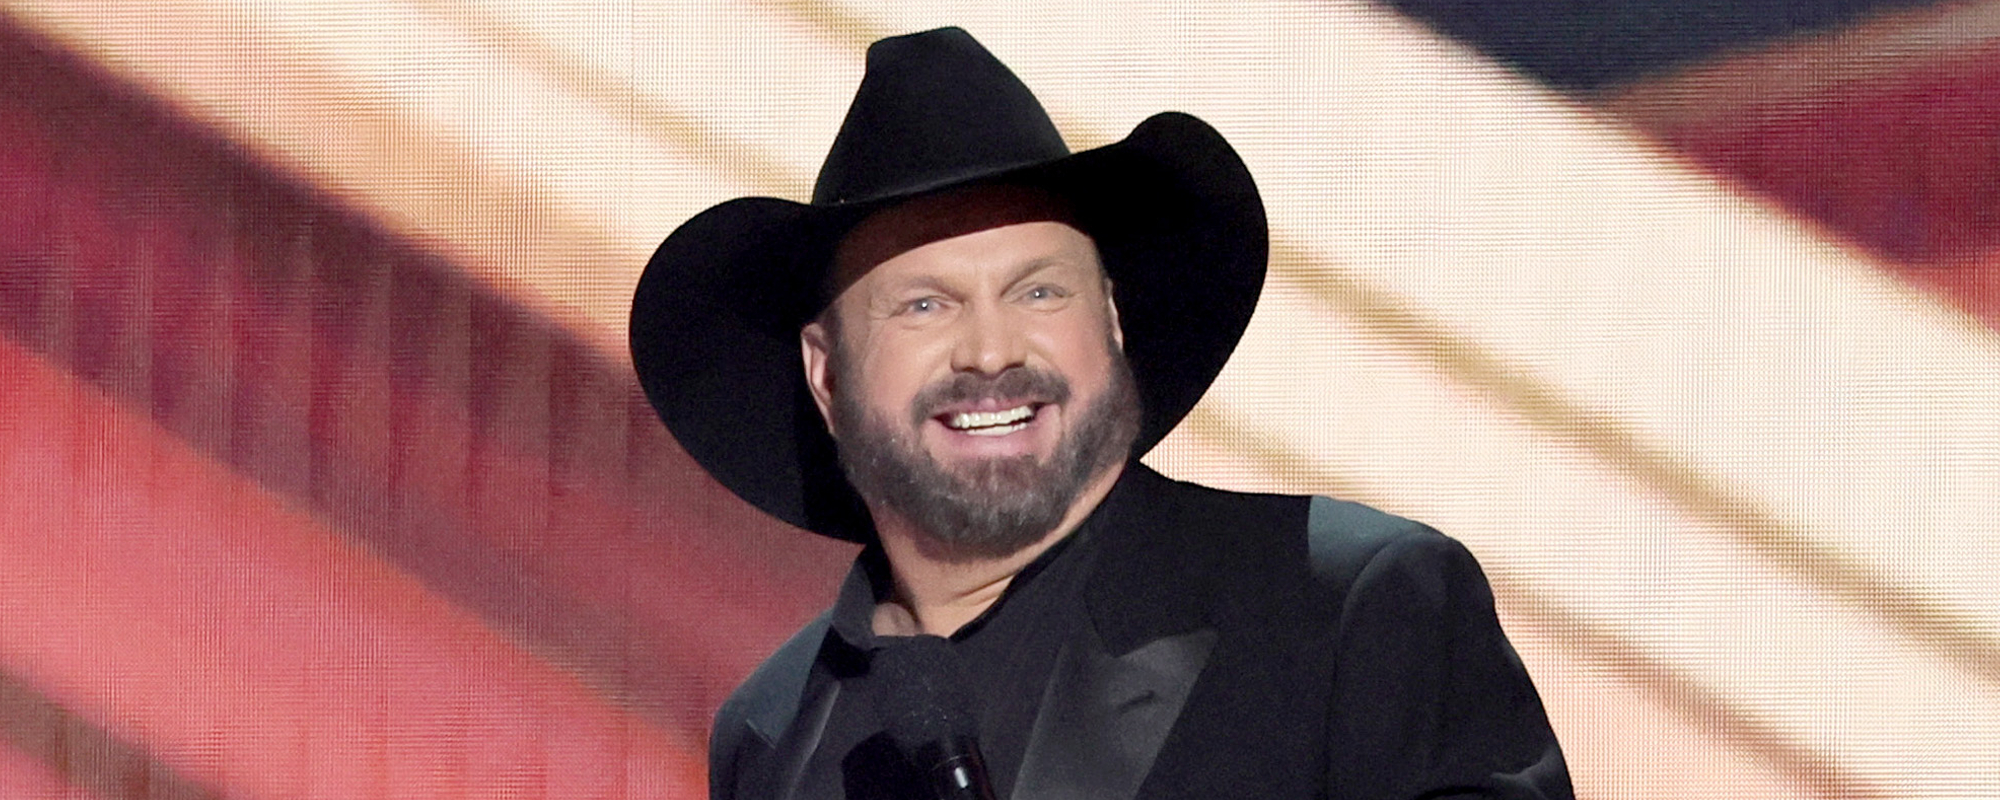 Remember When: Garth Brooks Channeled His Sex-Addicted Rock Alter-Ego Chris Gaines